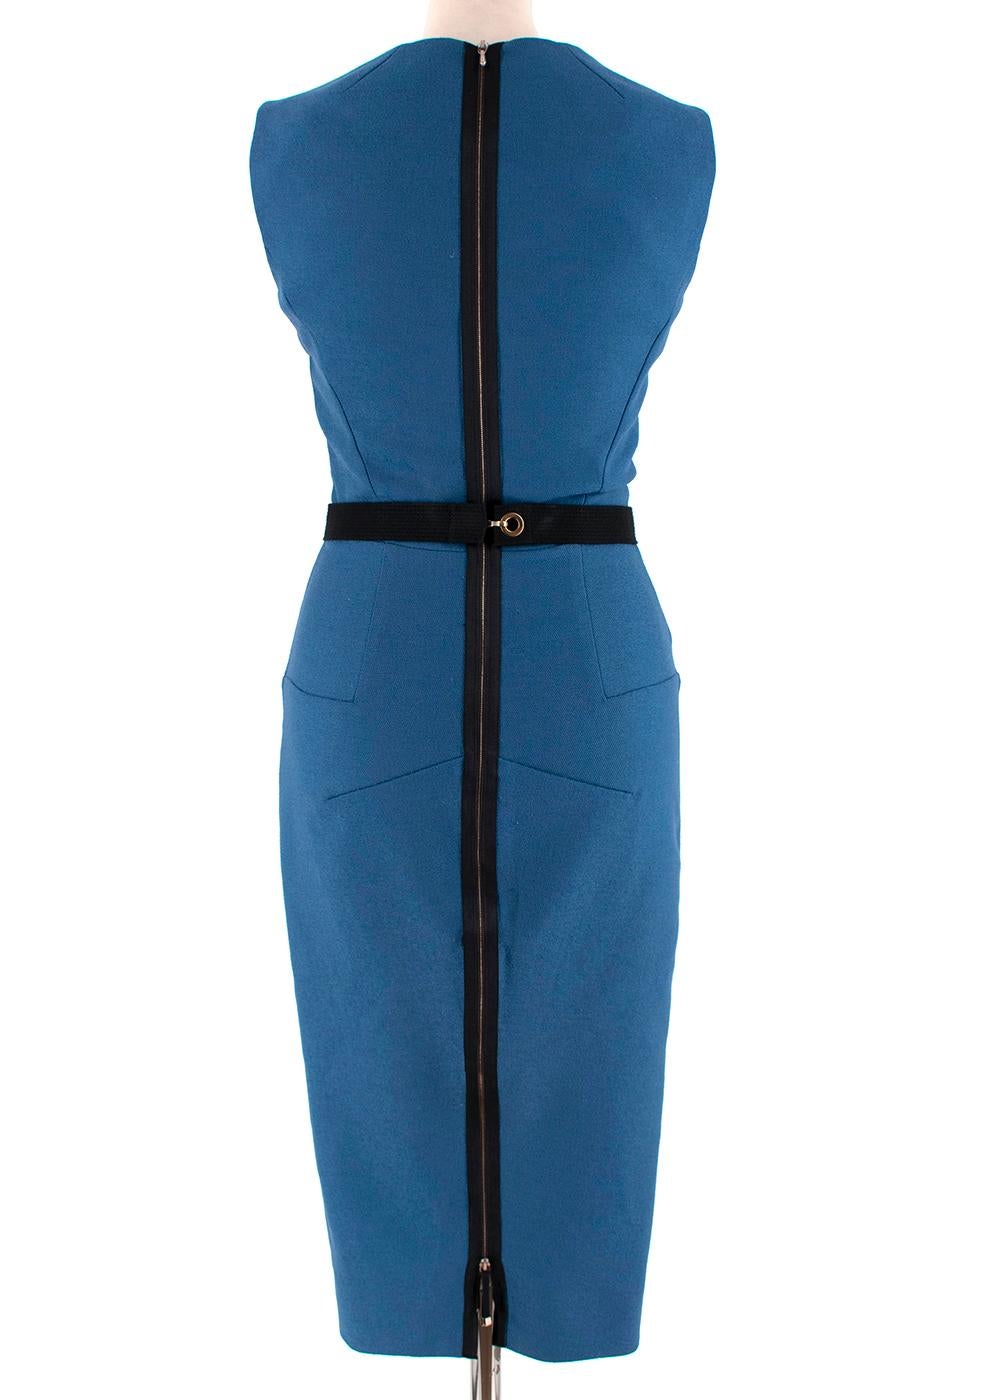 Victoria Beckham Blue Wool Fitted Sleeveless Dress - Size US 4 In New Condition For Sale In London, GB